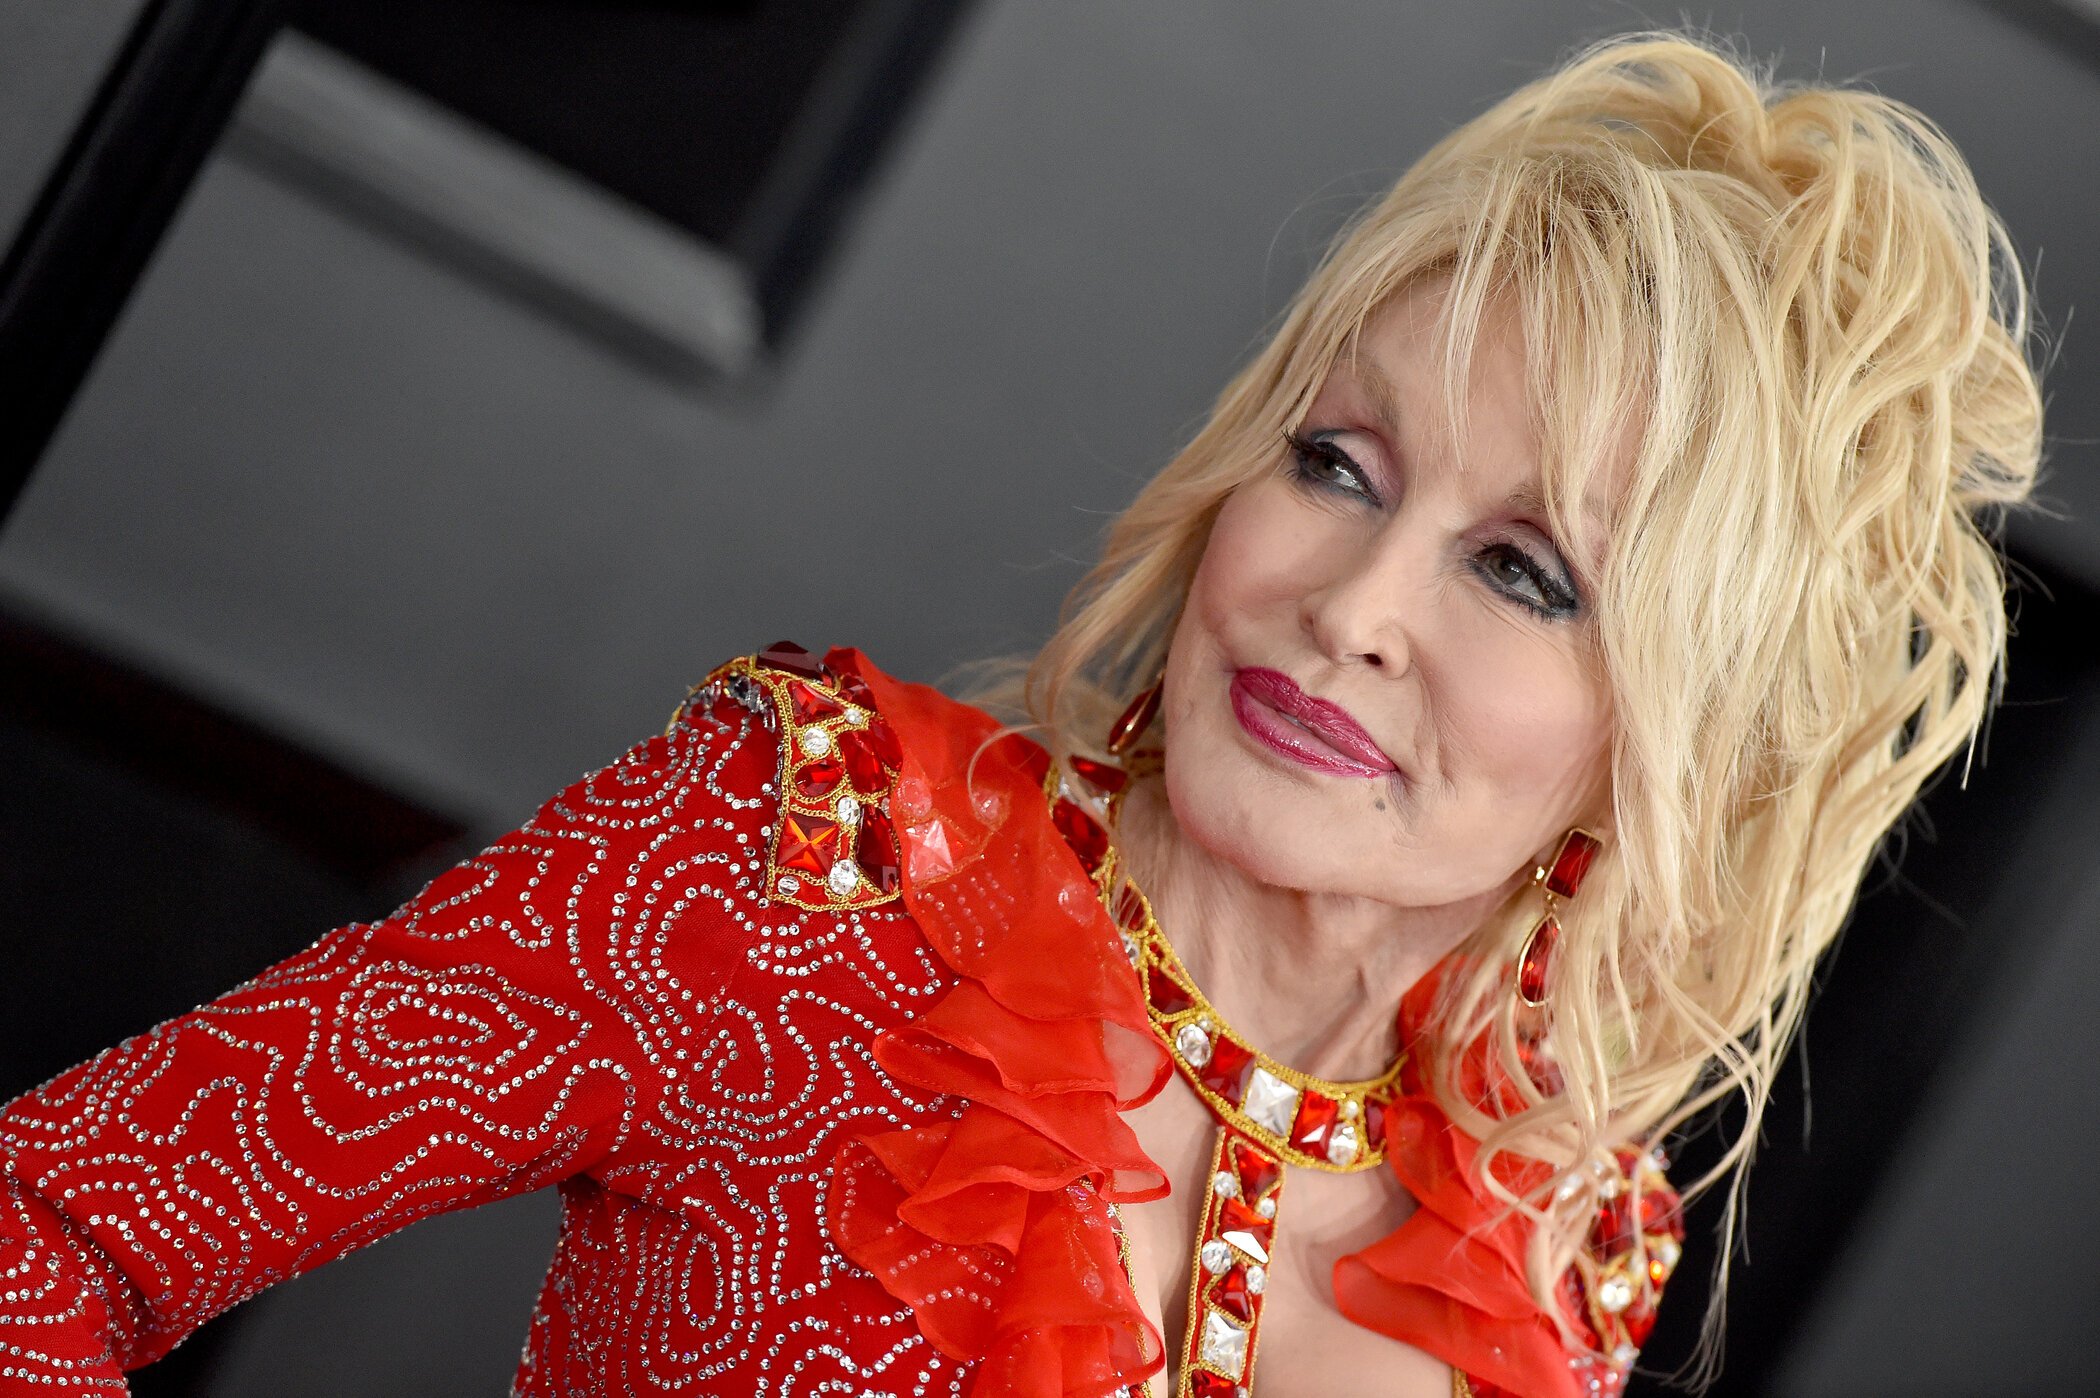 Dolly Parton attends the 61st Annual GRAMMY Awards at Staples Center on February 10, 2019 in Los Angeles, California.